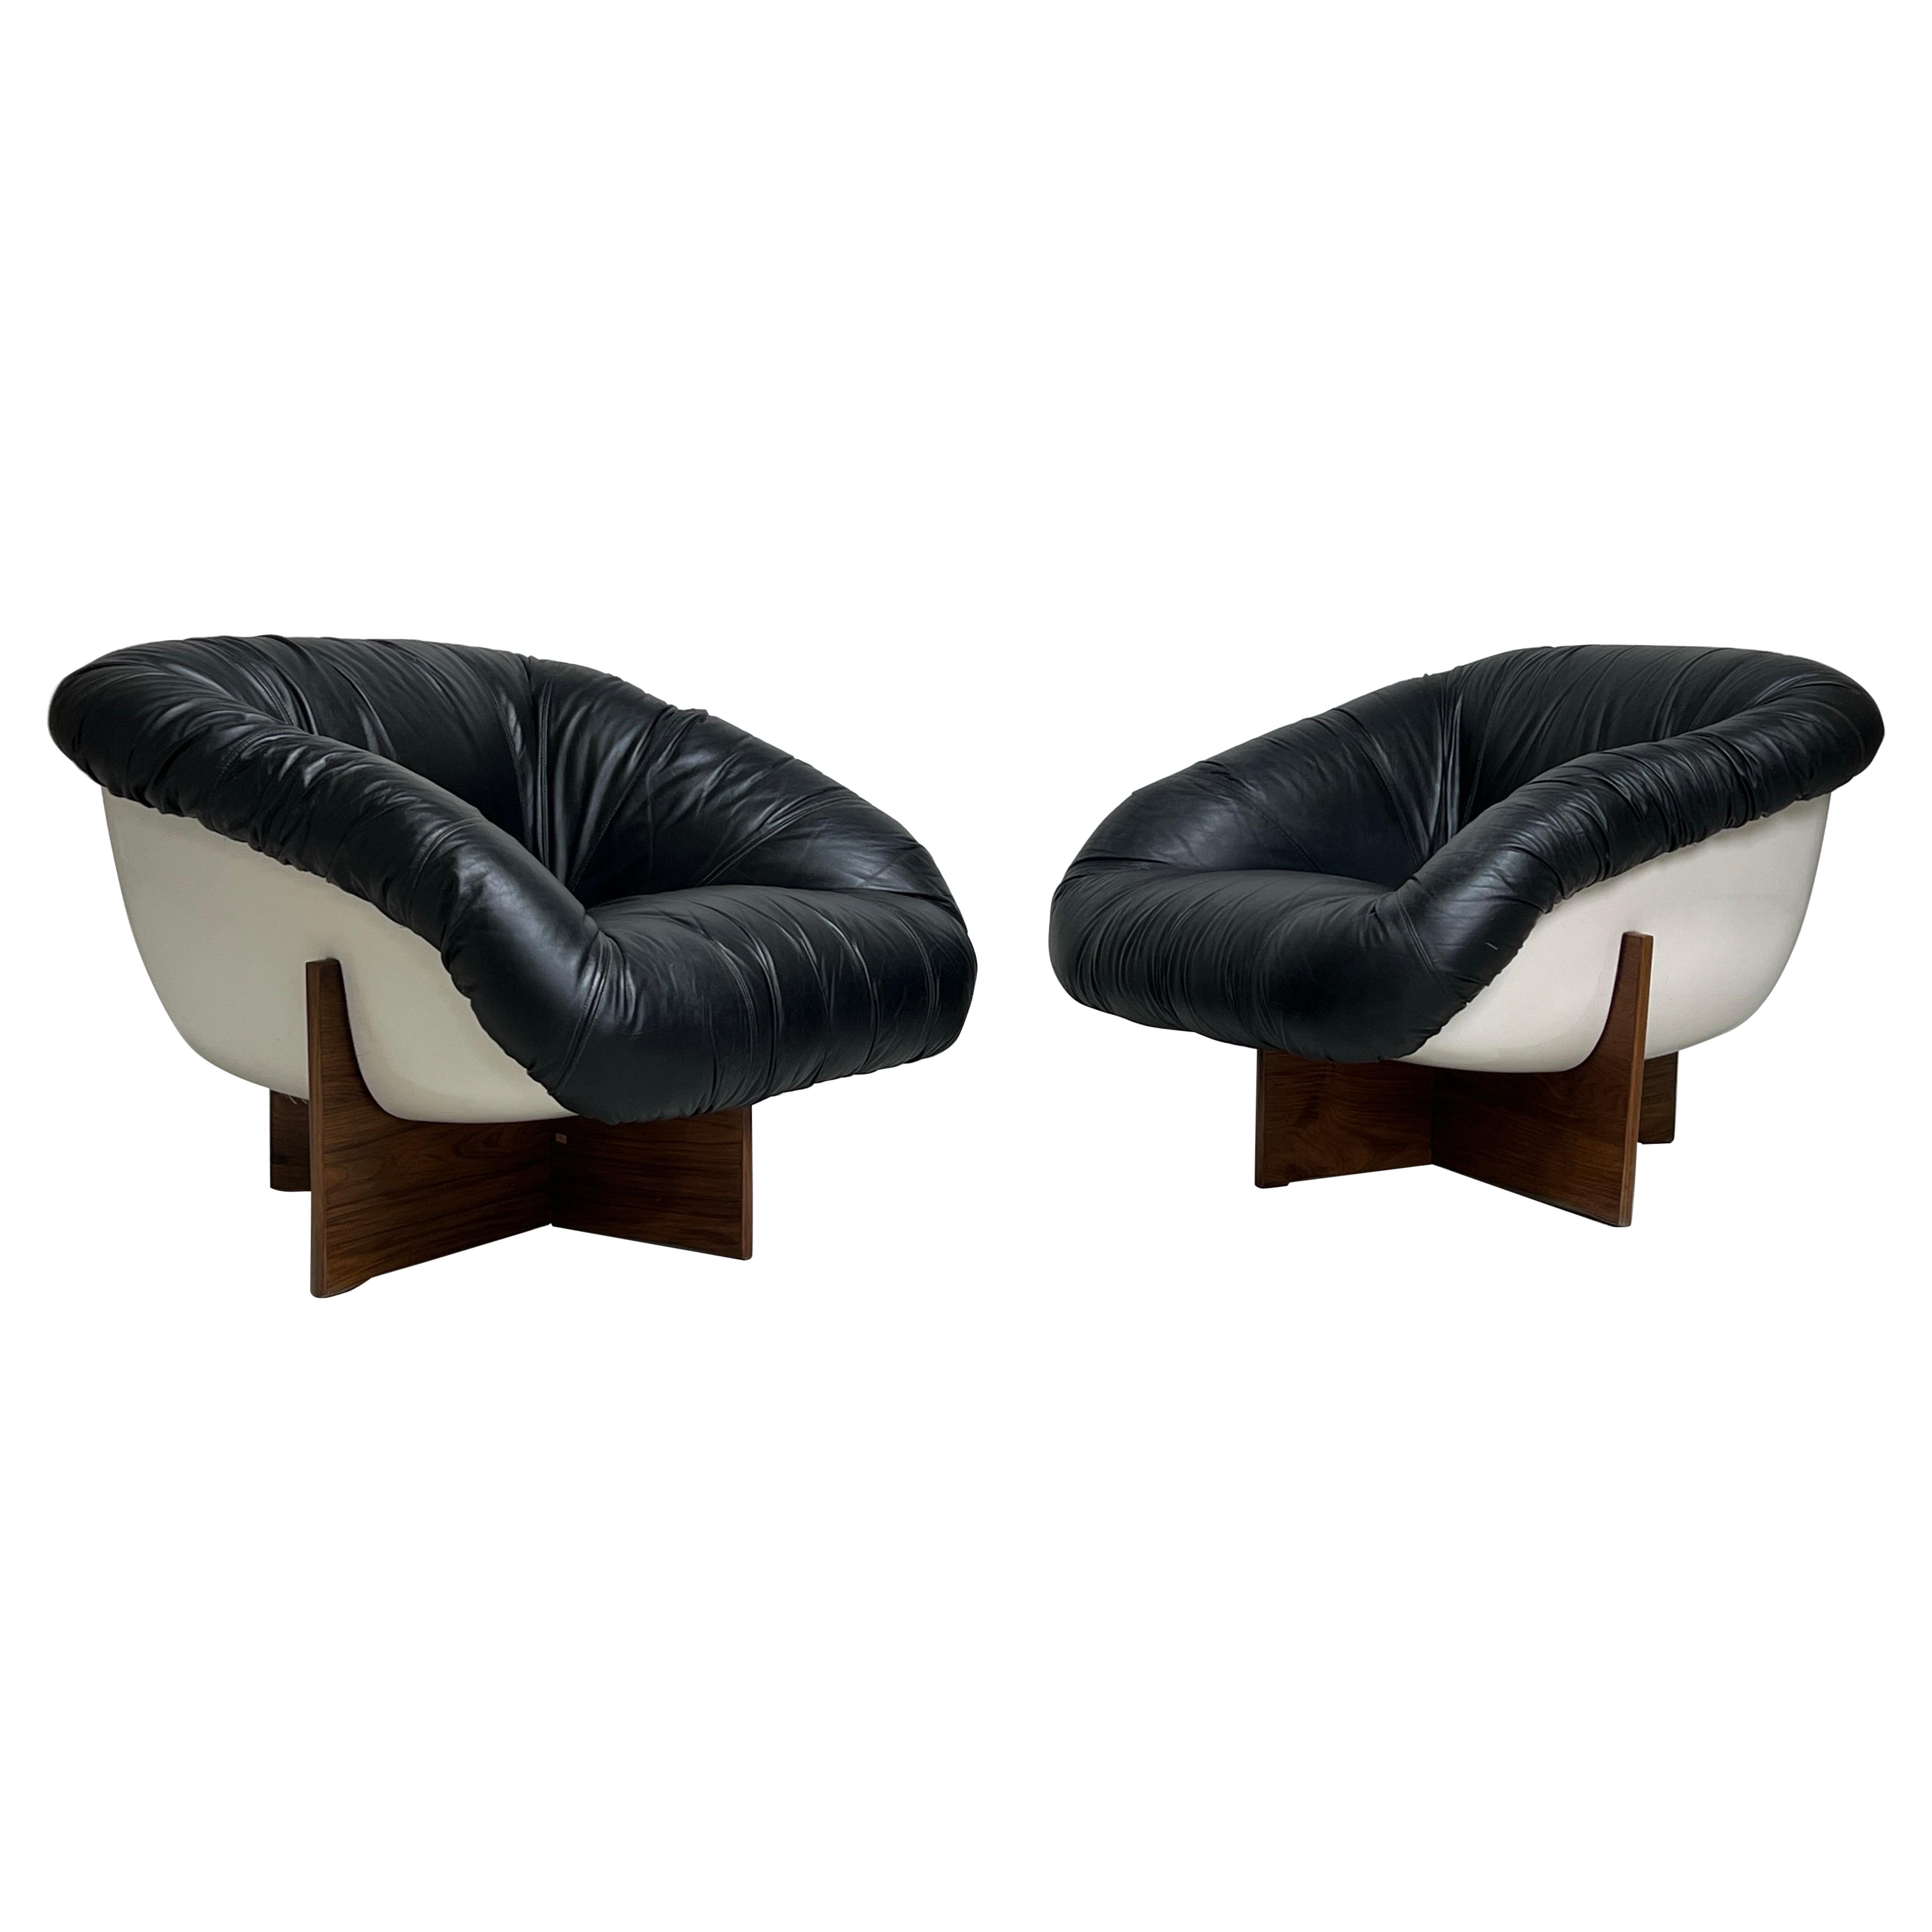 Pair of MP-61 Leather Lounge Chairs by Percival Lafer, 1973